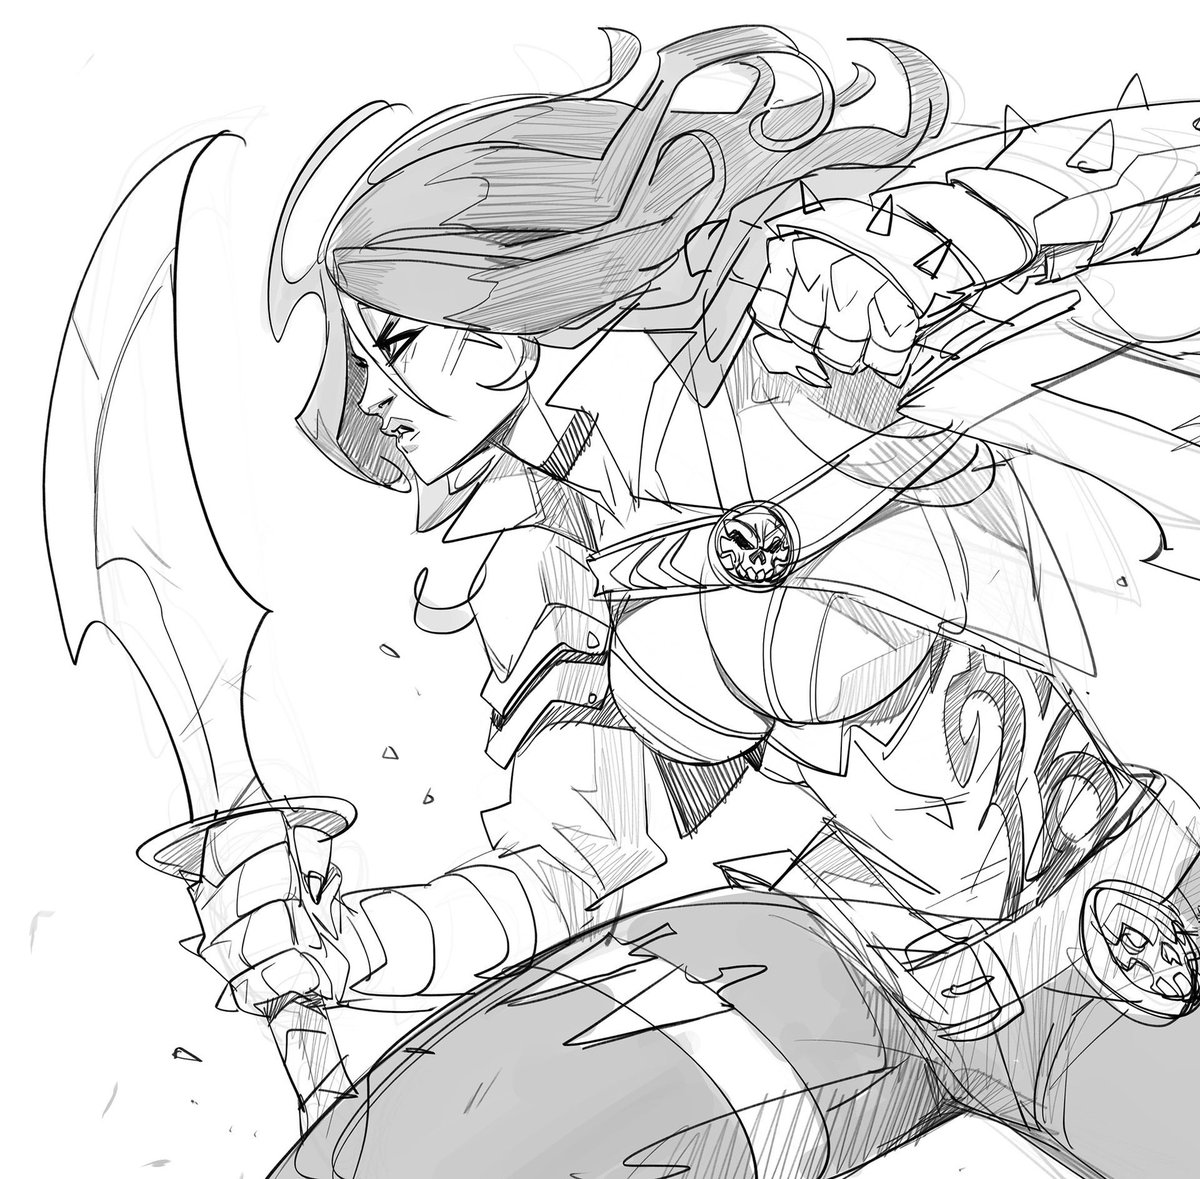 More doodle and sketches from L&K sketchbook #Katarina #fury 